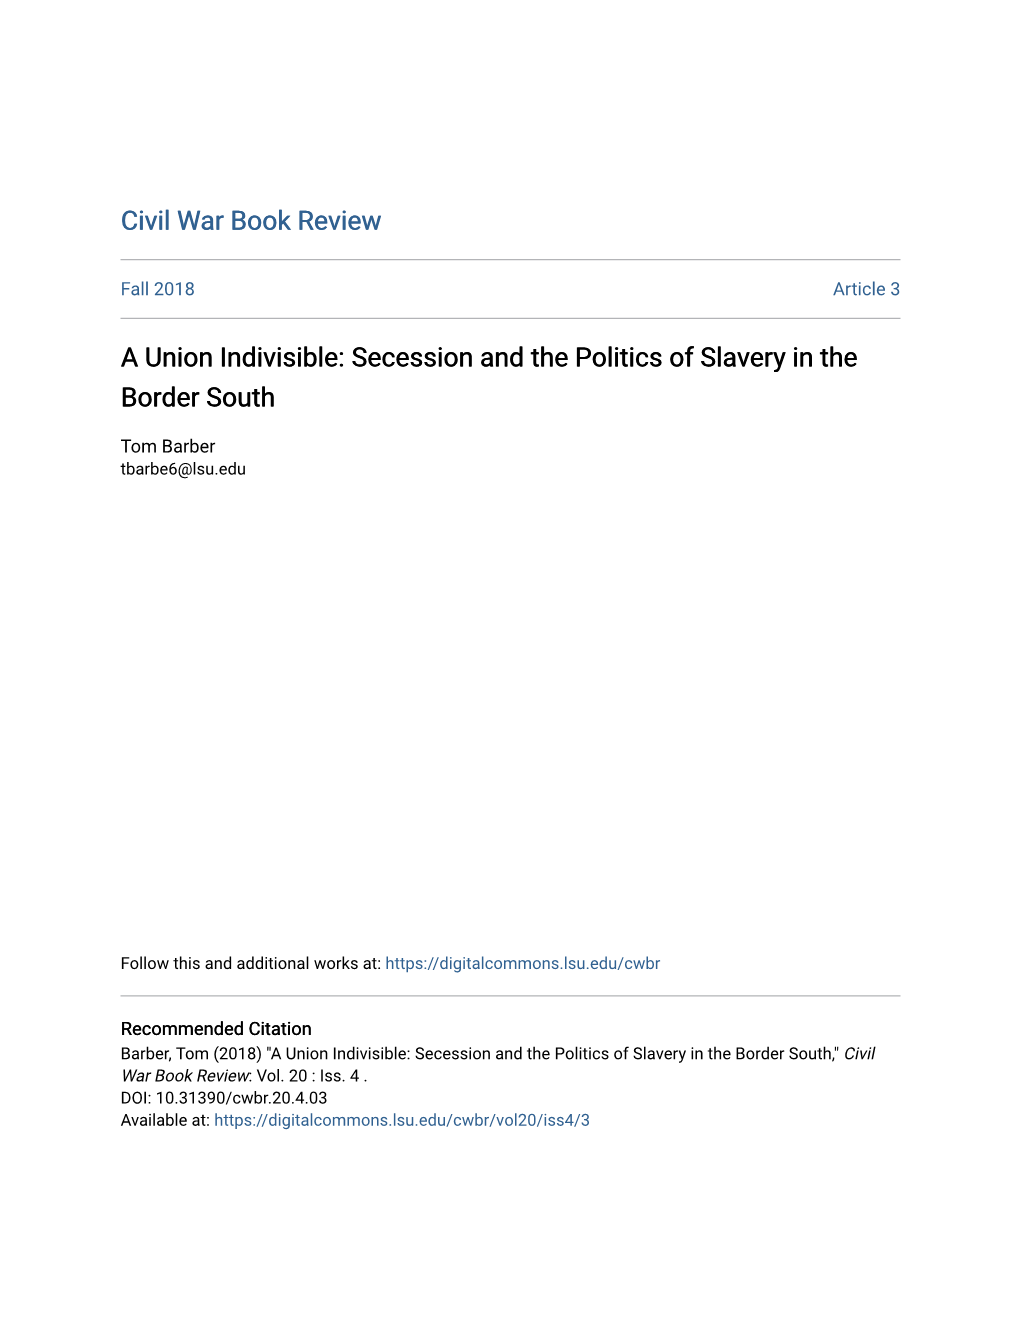 A Union Indivisible: Secession and the Politics of Slavery in the Border South